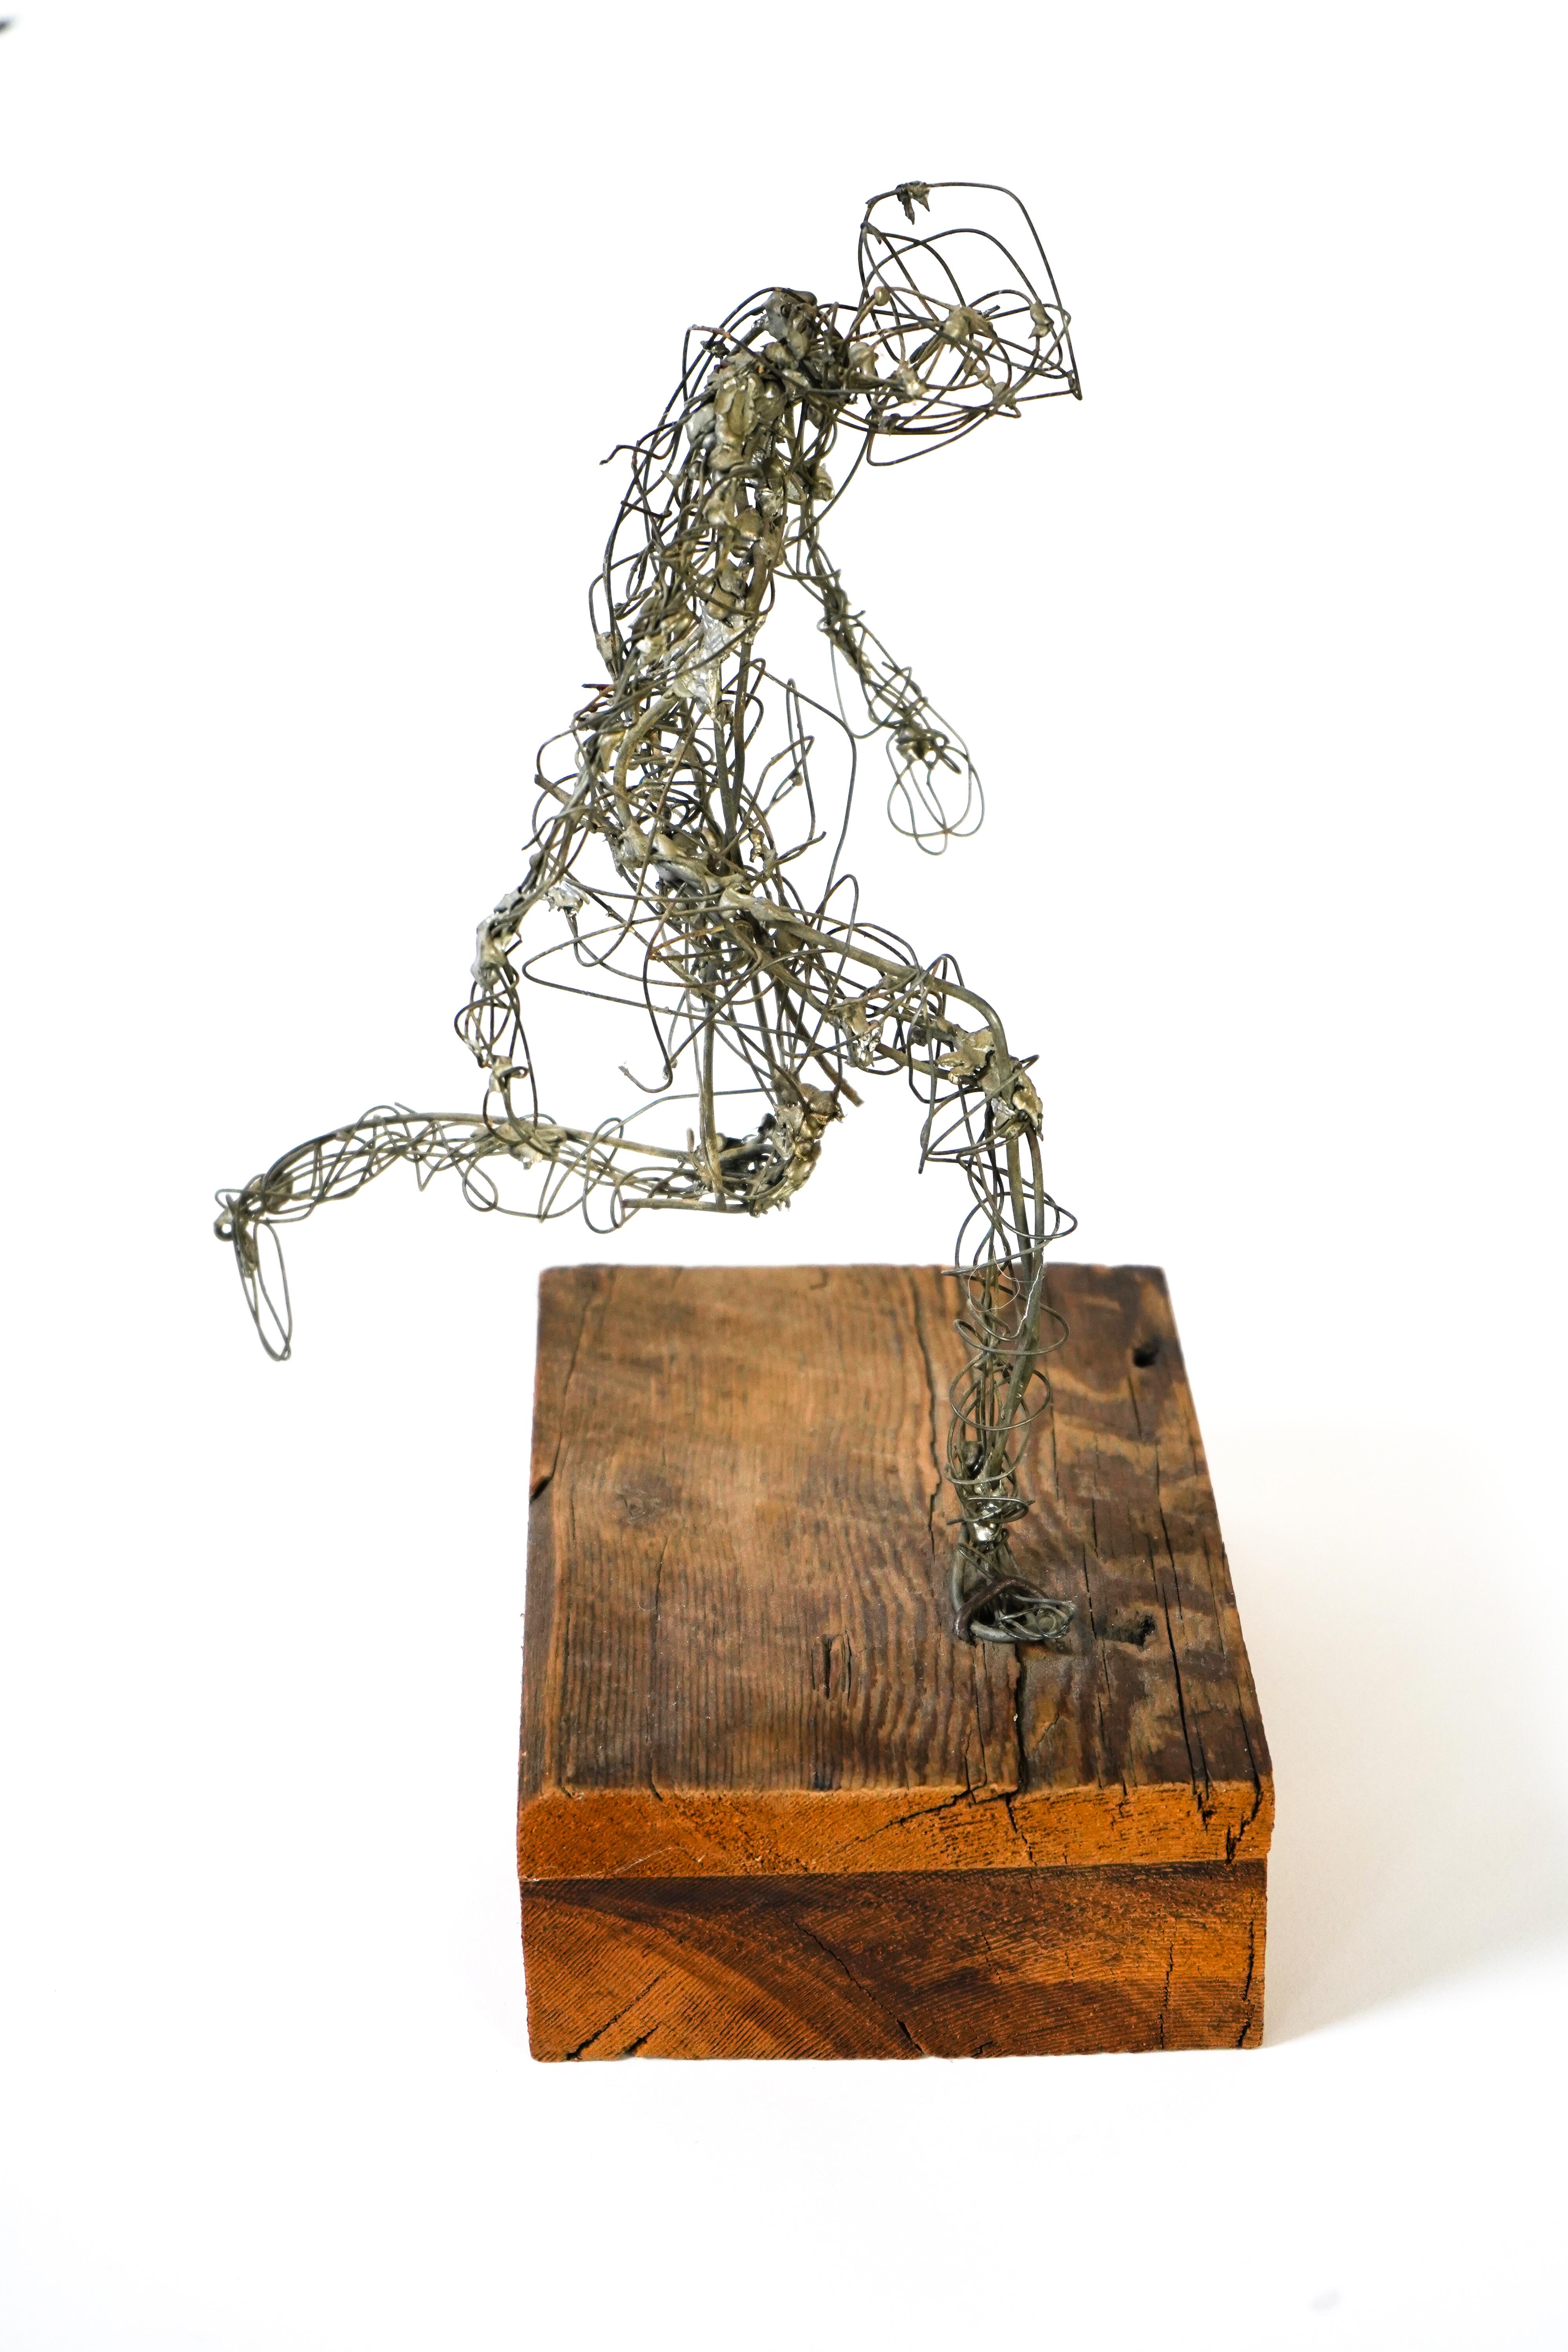 American Frances Venardos Gialamas Abstract Wire Figure In Motion Sculpture For Sale